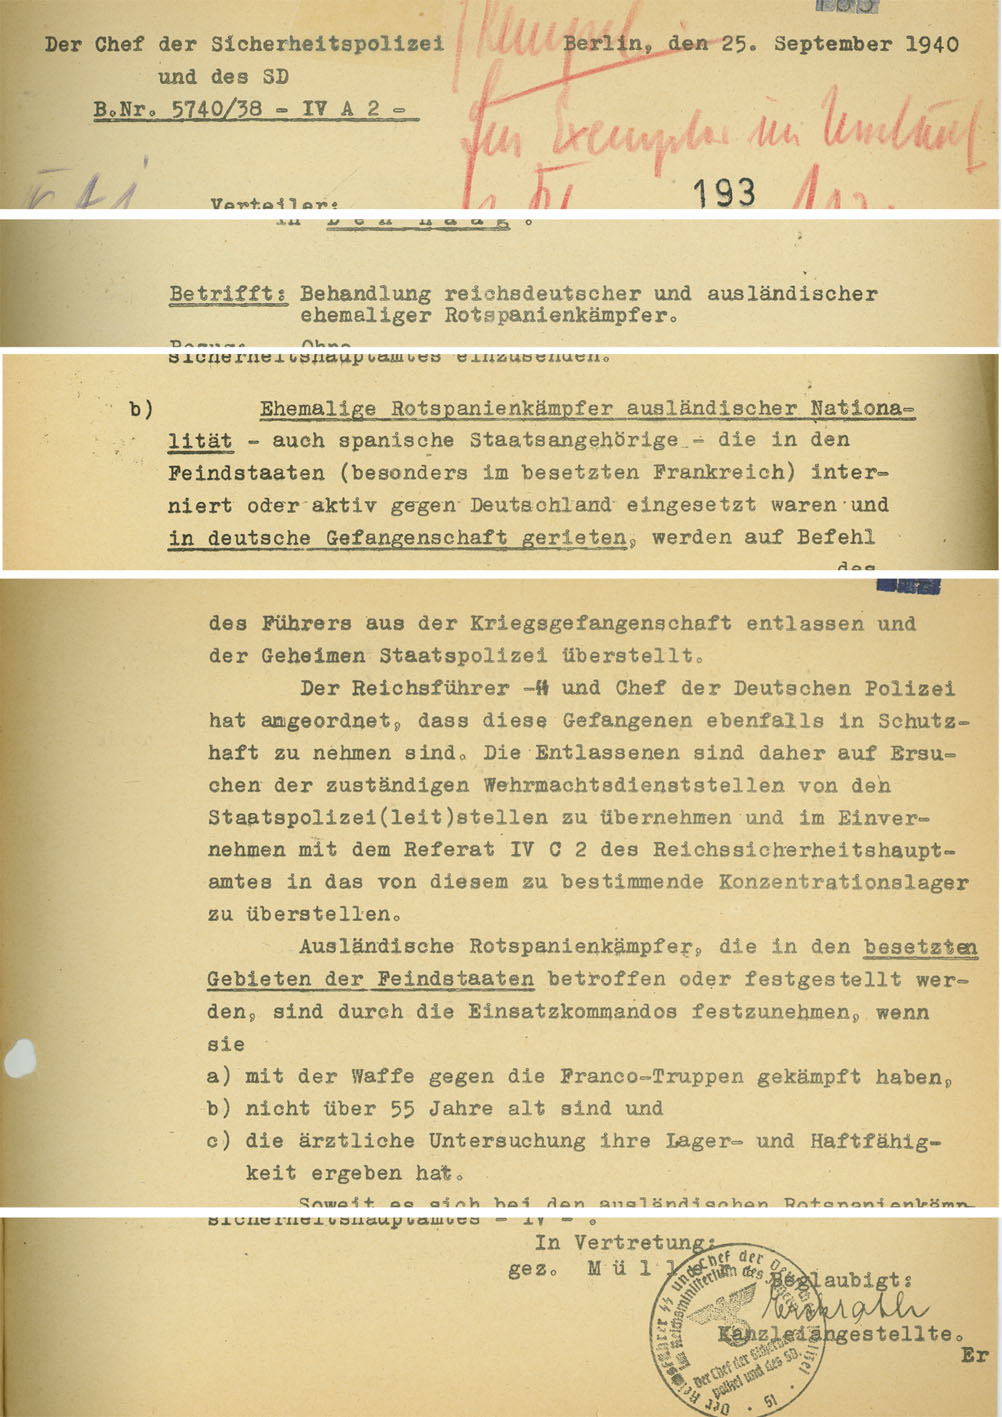 Memorandum by the Chief of the Security Police and the SD, dated 25th September 1940, concerning the treatment of foreign and German former combatants in Spain. The ordinance accompanying this memo provided the basis for the mass deportation of former members of the Republican Army to the concentration camps. (Bundesarchiv, Koblenz, R 58/26)